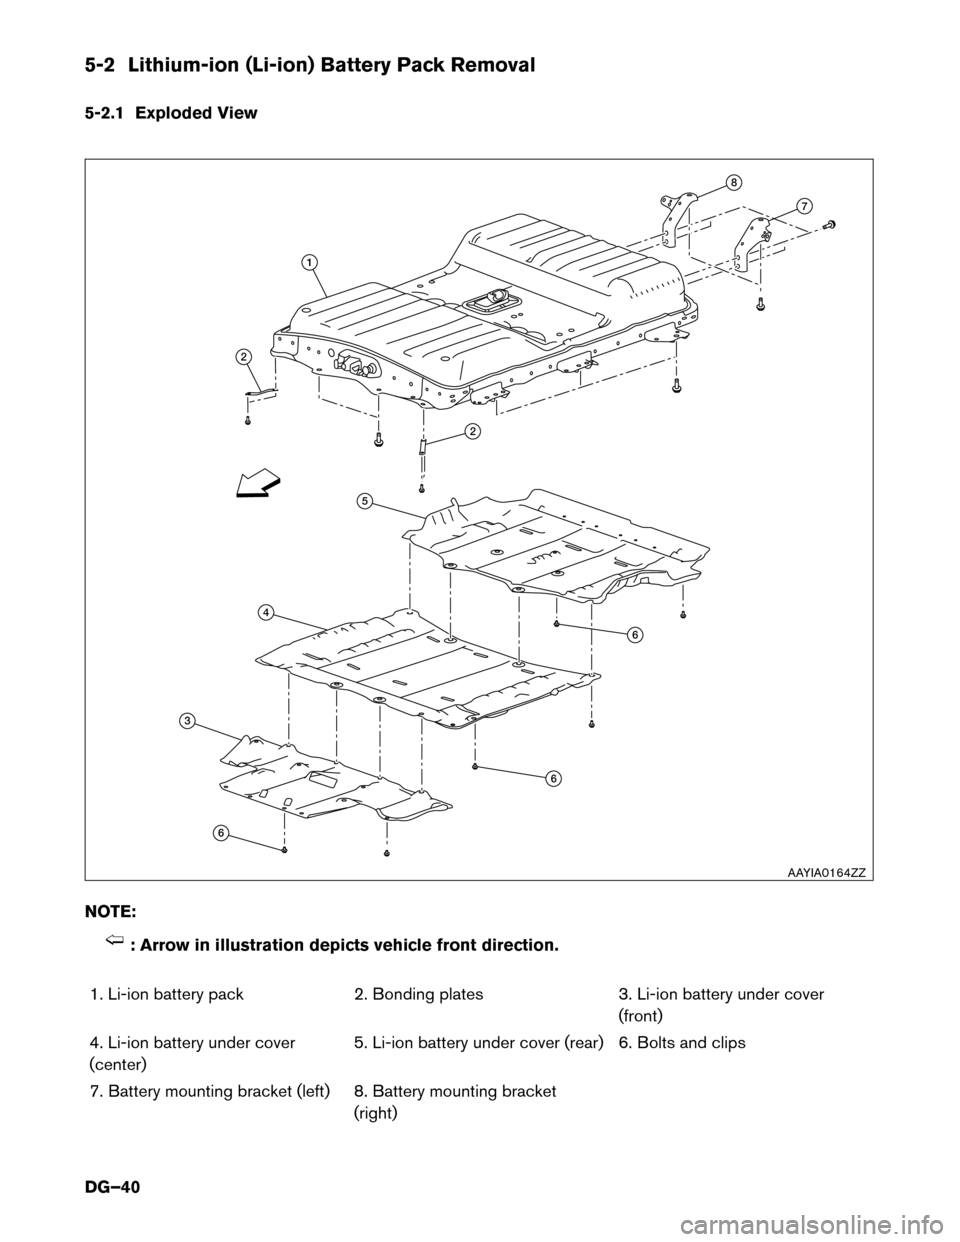 NISSAN LEAF 2014 1.G Dismantling Guide 5-2 Lithium-ion (Li-ion) Battery Pack Removal
5-2.1
Exploded View
NOTE: : Arrow in illustration depicts vehicle front direction.
1.

Li-ion battery pack 2. Bonding plates 3. Li-ion battery under cover